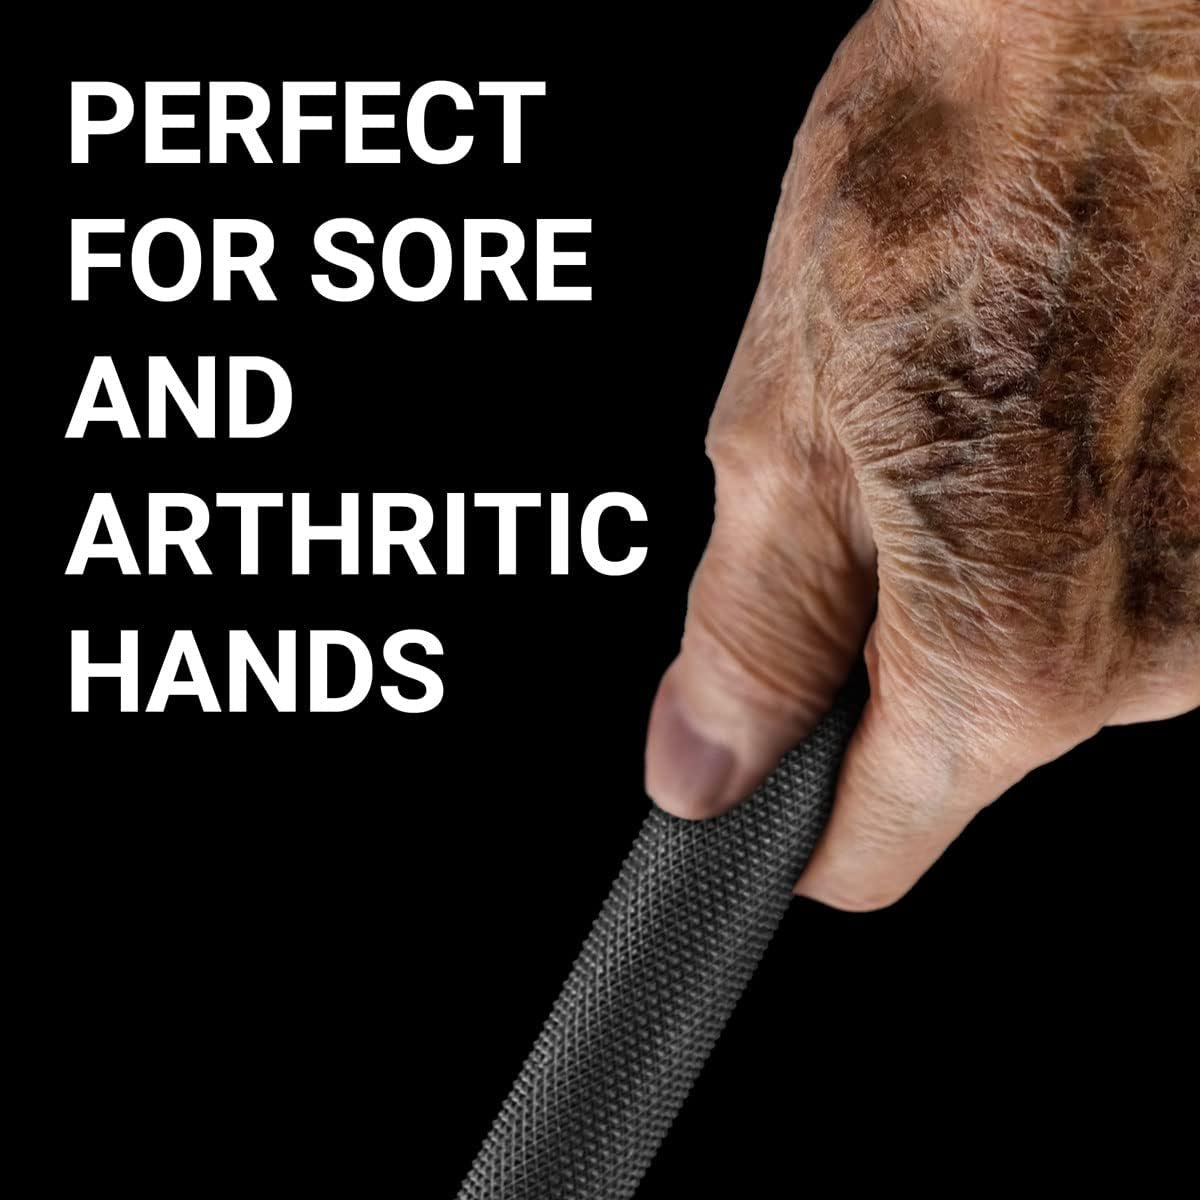 Comparison of Arthritic Golf Grips: Which Offers the Best Comfort and Performance?